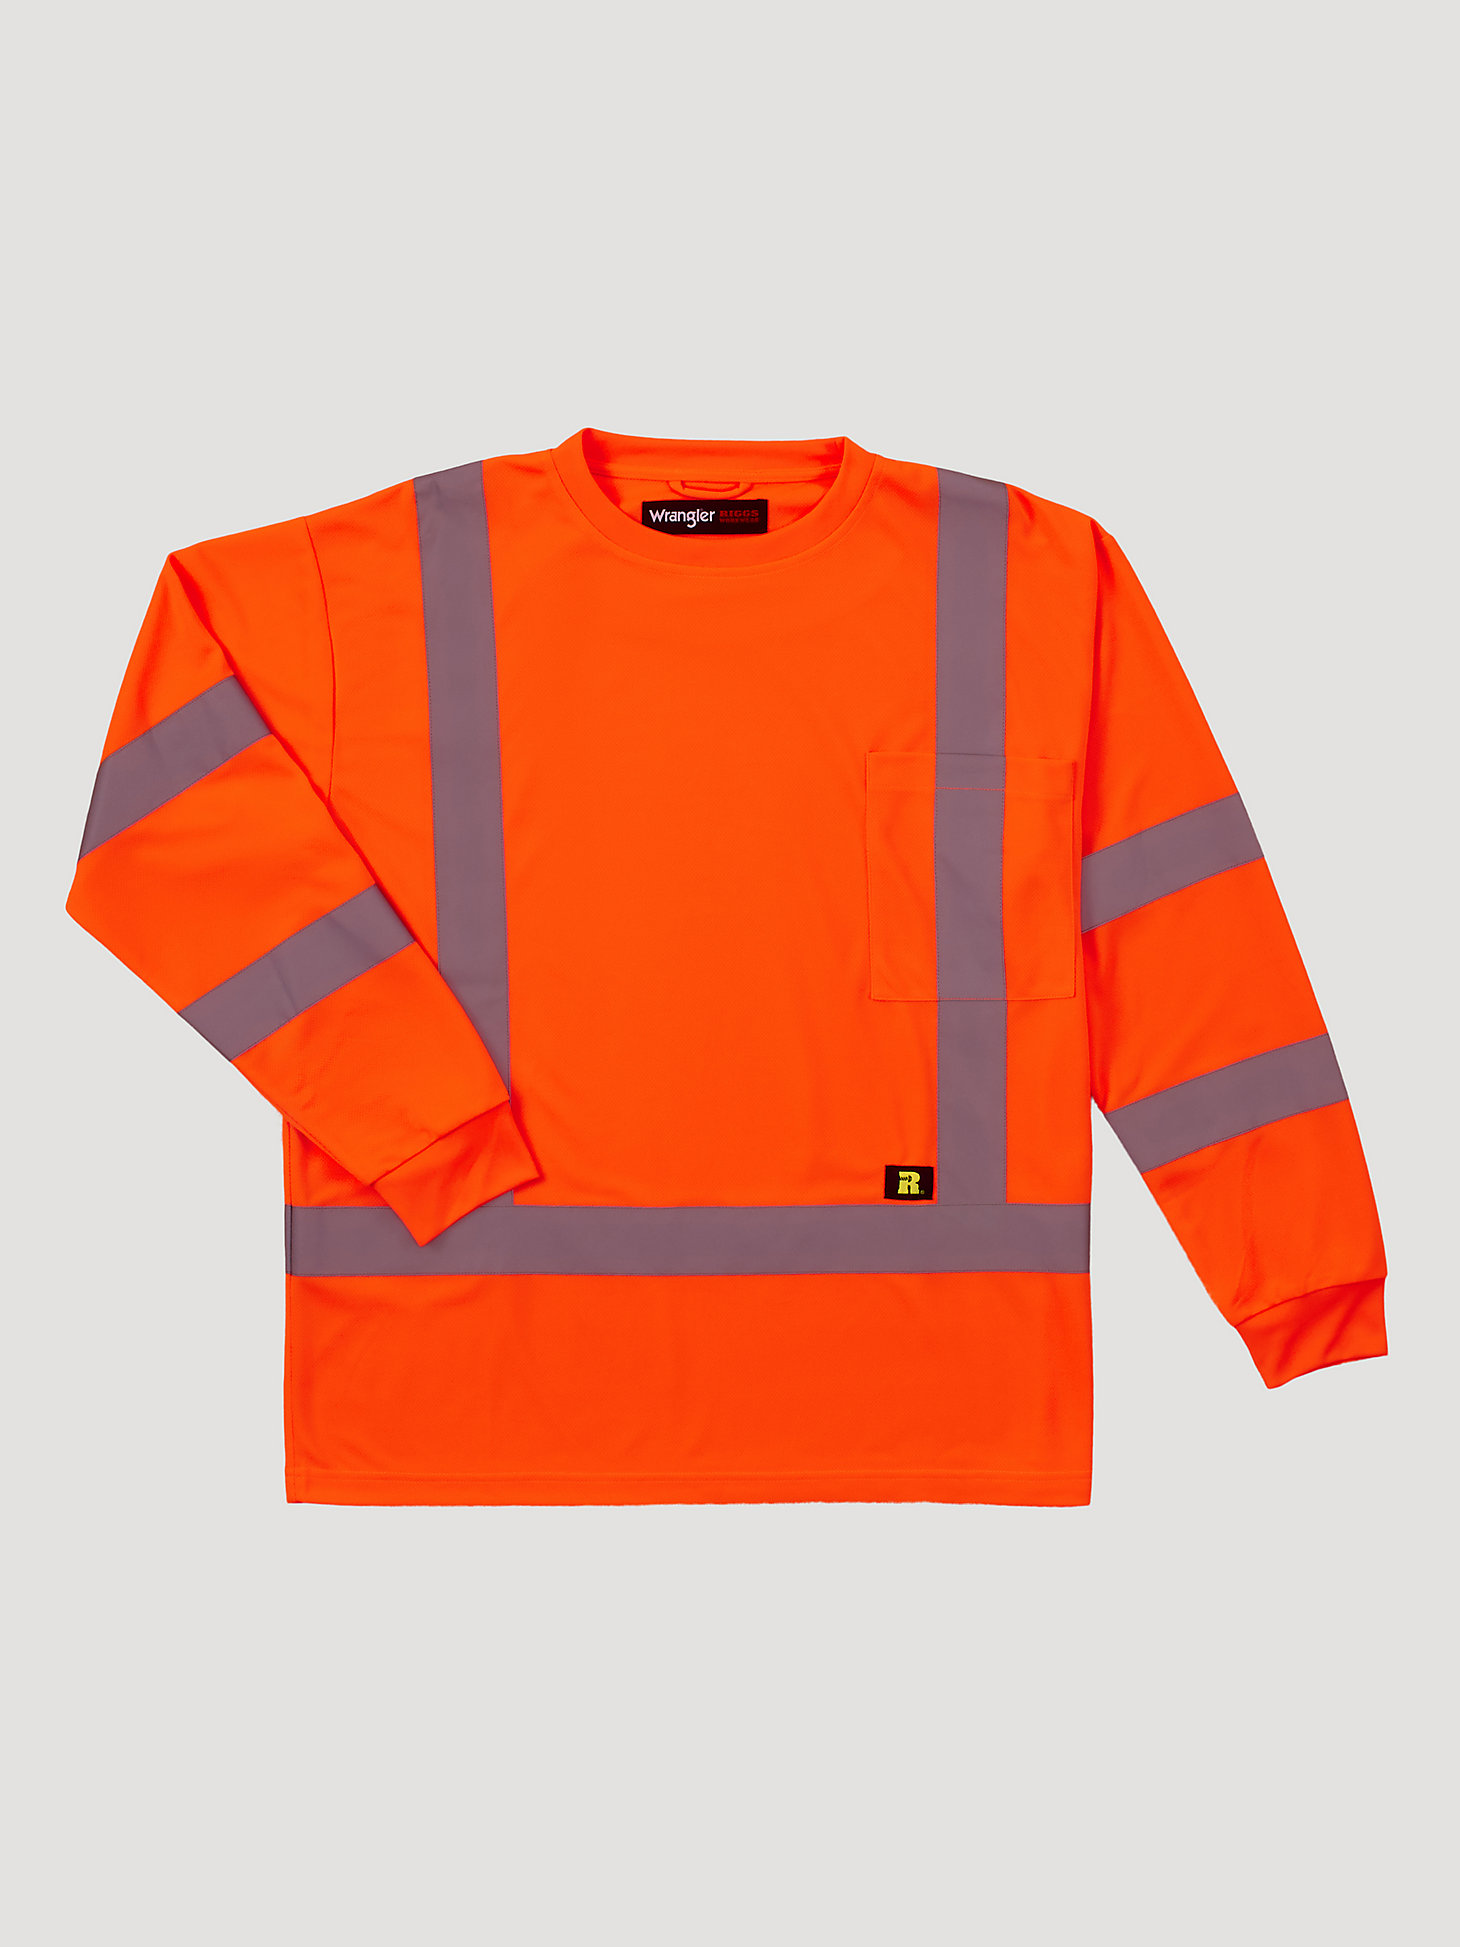 Wrangler® RIGGS Workwear® Long Sleeve High Visibility T-Shirt in Safety Orange alternative view 5